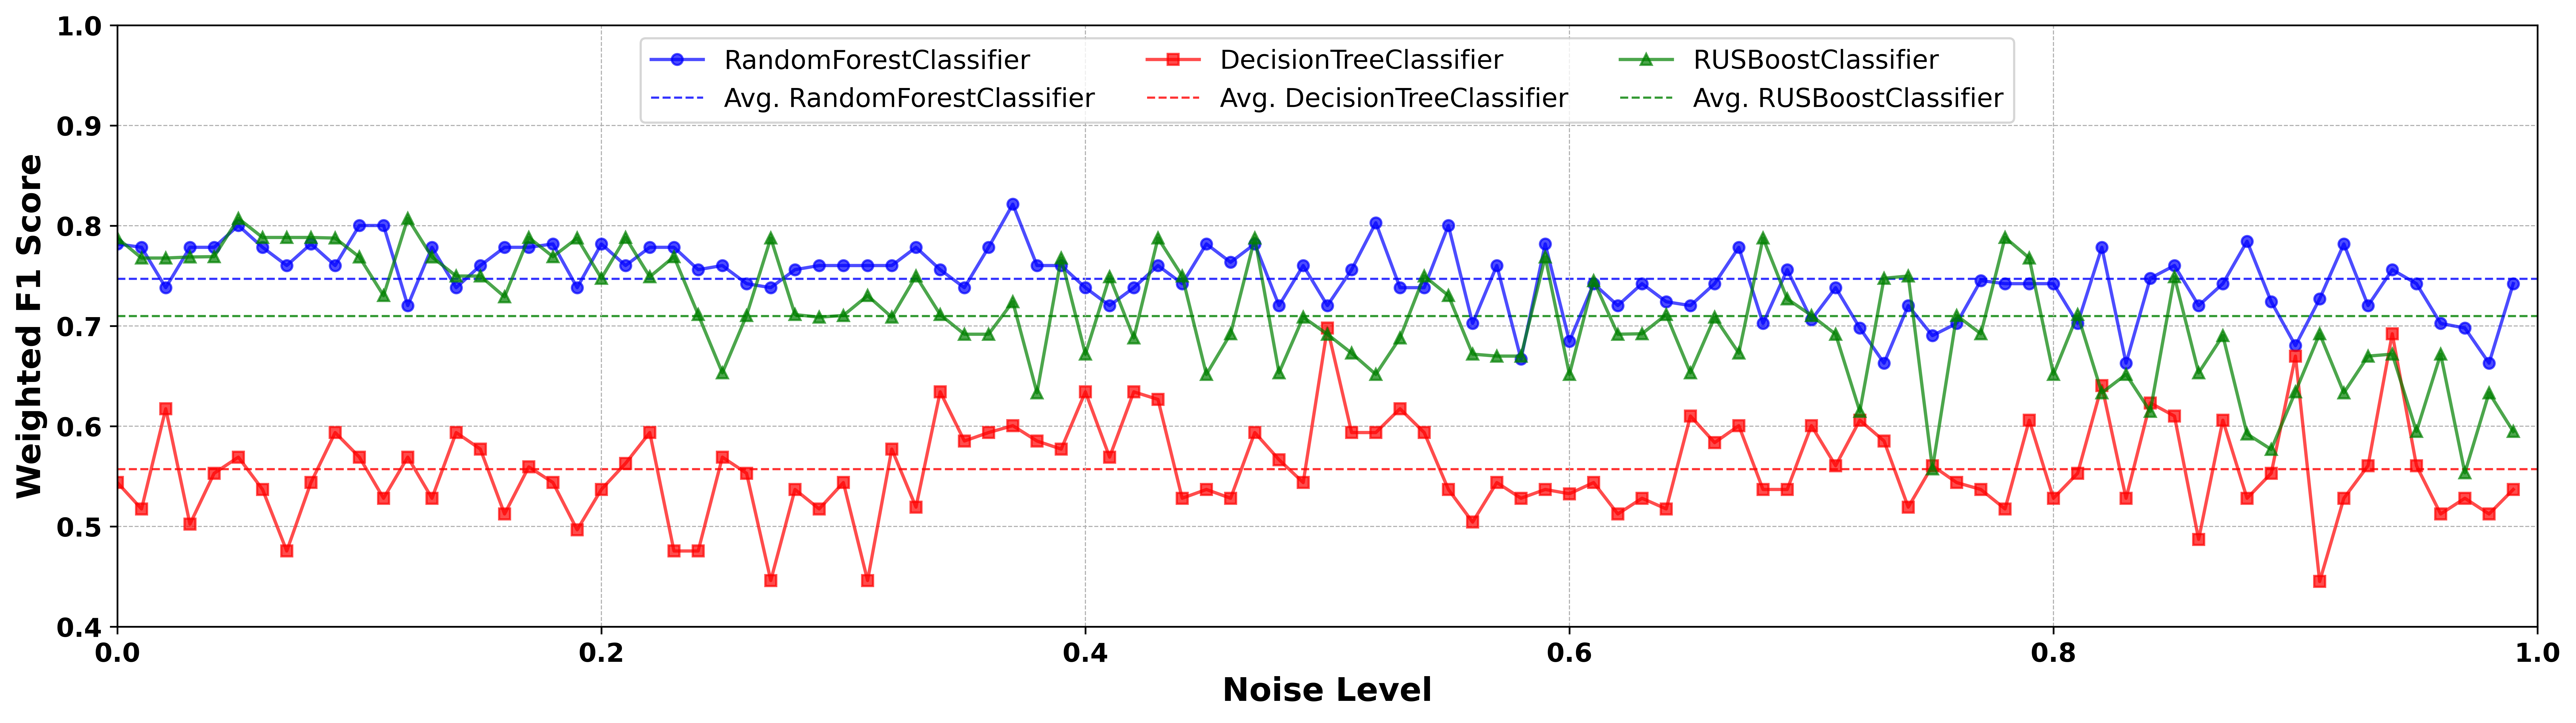 The line chart displays the performance of three machine learning models (RandomForestClassifier, DecisionTreeClassifier, and RUSBoostClassifier) under different levels of Gaussian noise. The y-axis represents the weighted F1 score, and the x-axis represents the noise level. RandomForestClassifier is shown in blue, DecisionTreeClassifier in red, and RUSBoostClassifier in green, with solid lines representing individual scores and dashed lines representing the average scores.